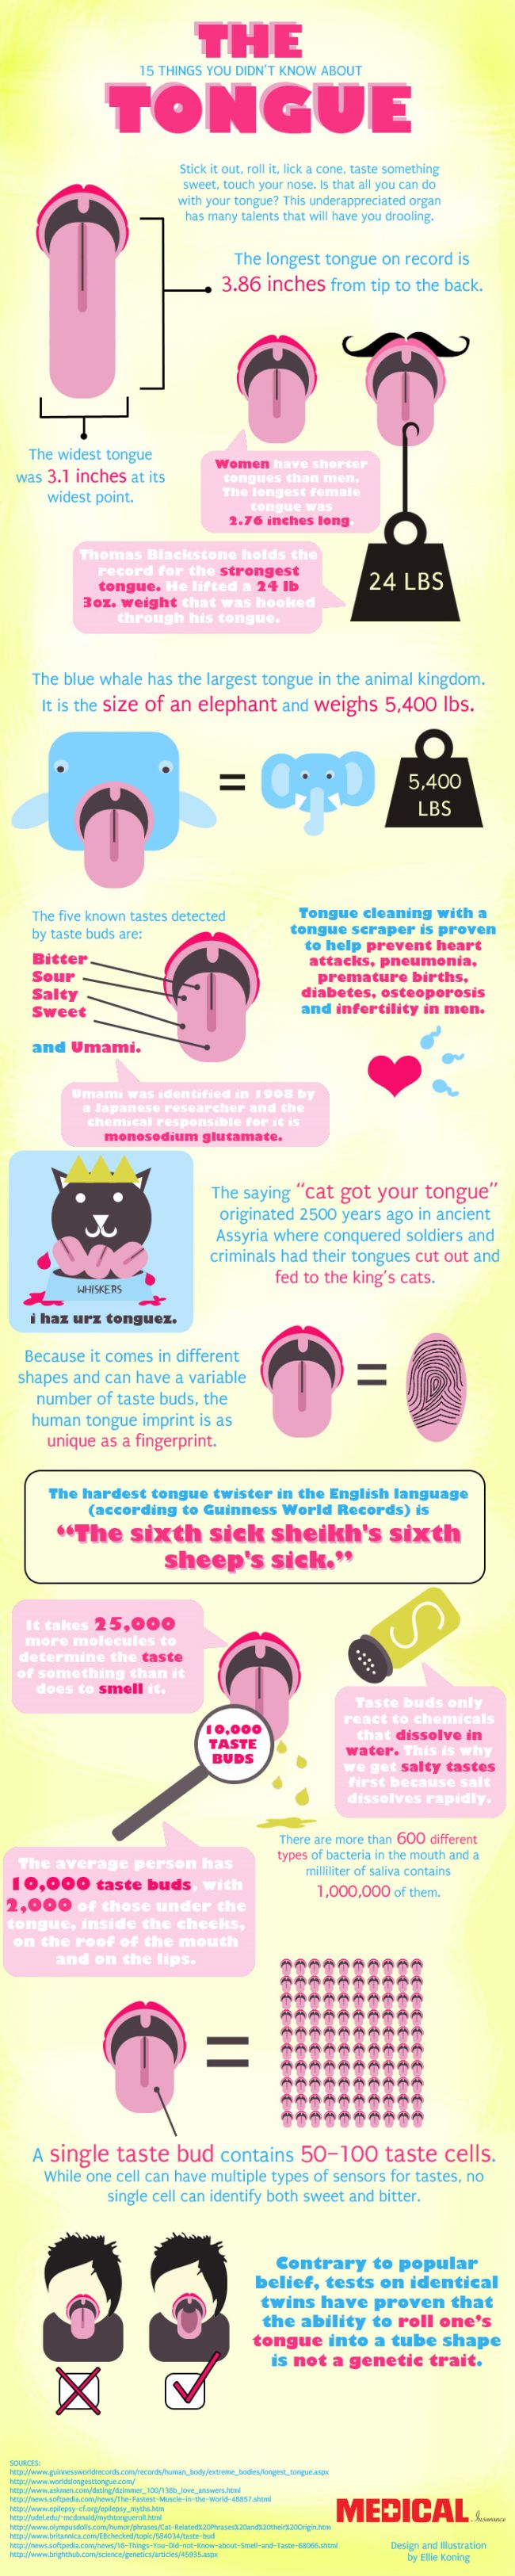 Good info on the tongue.